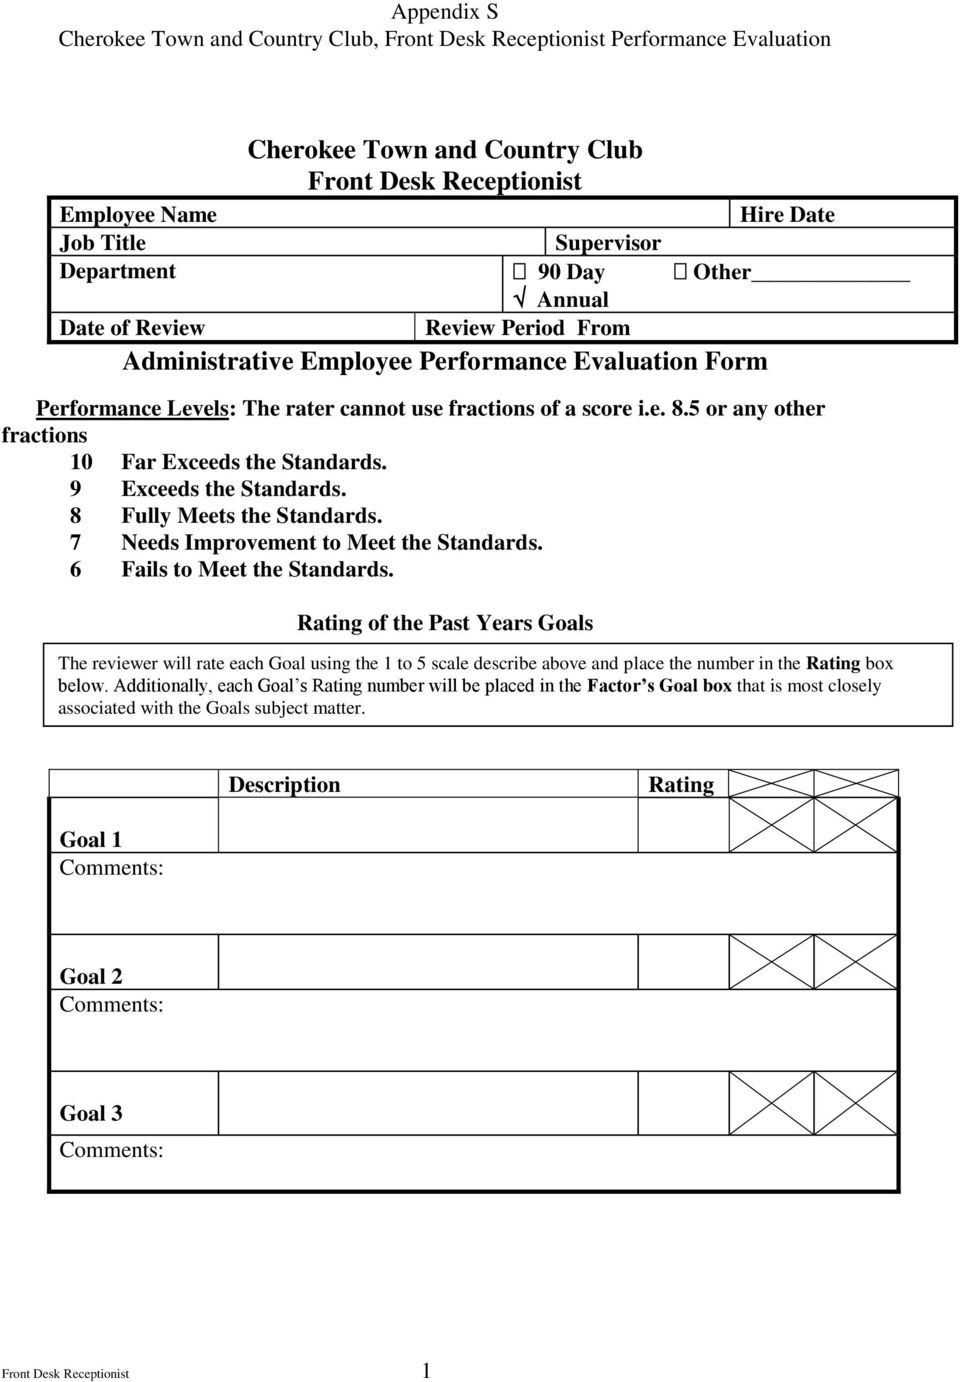 Self Evaluation Form Of Receptionist It Is An Annual 